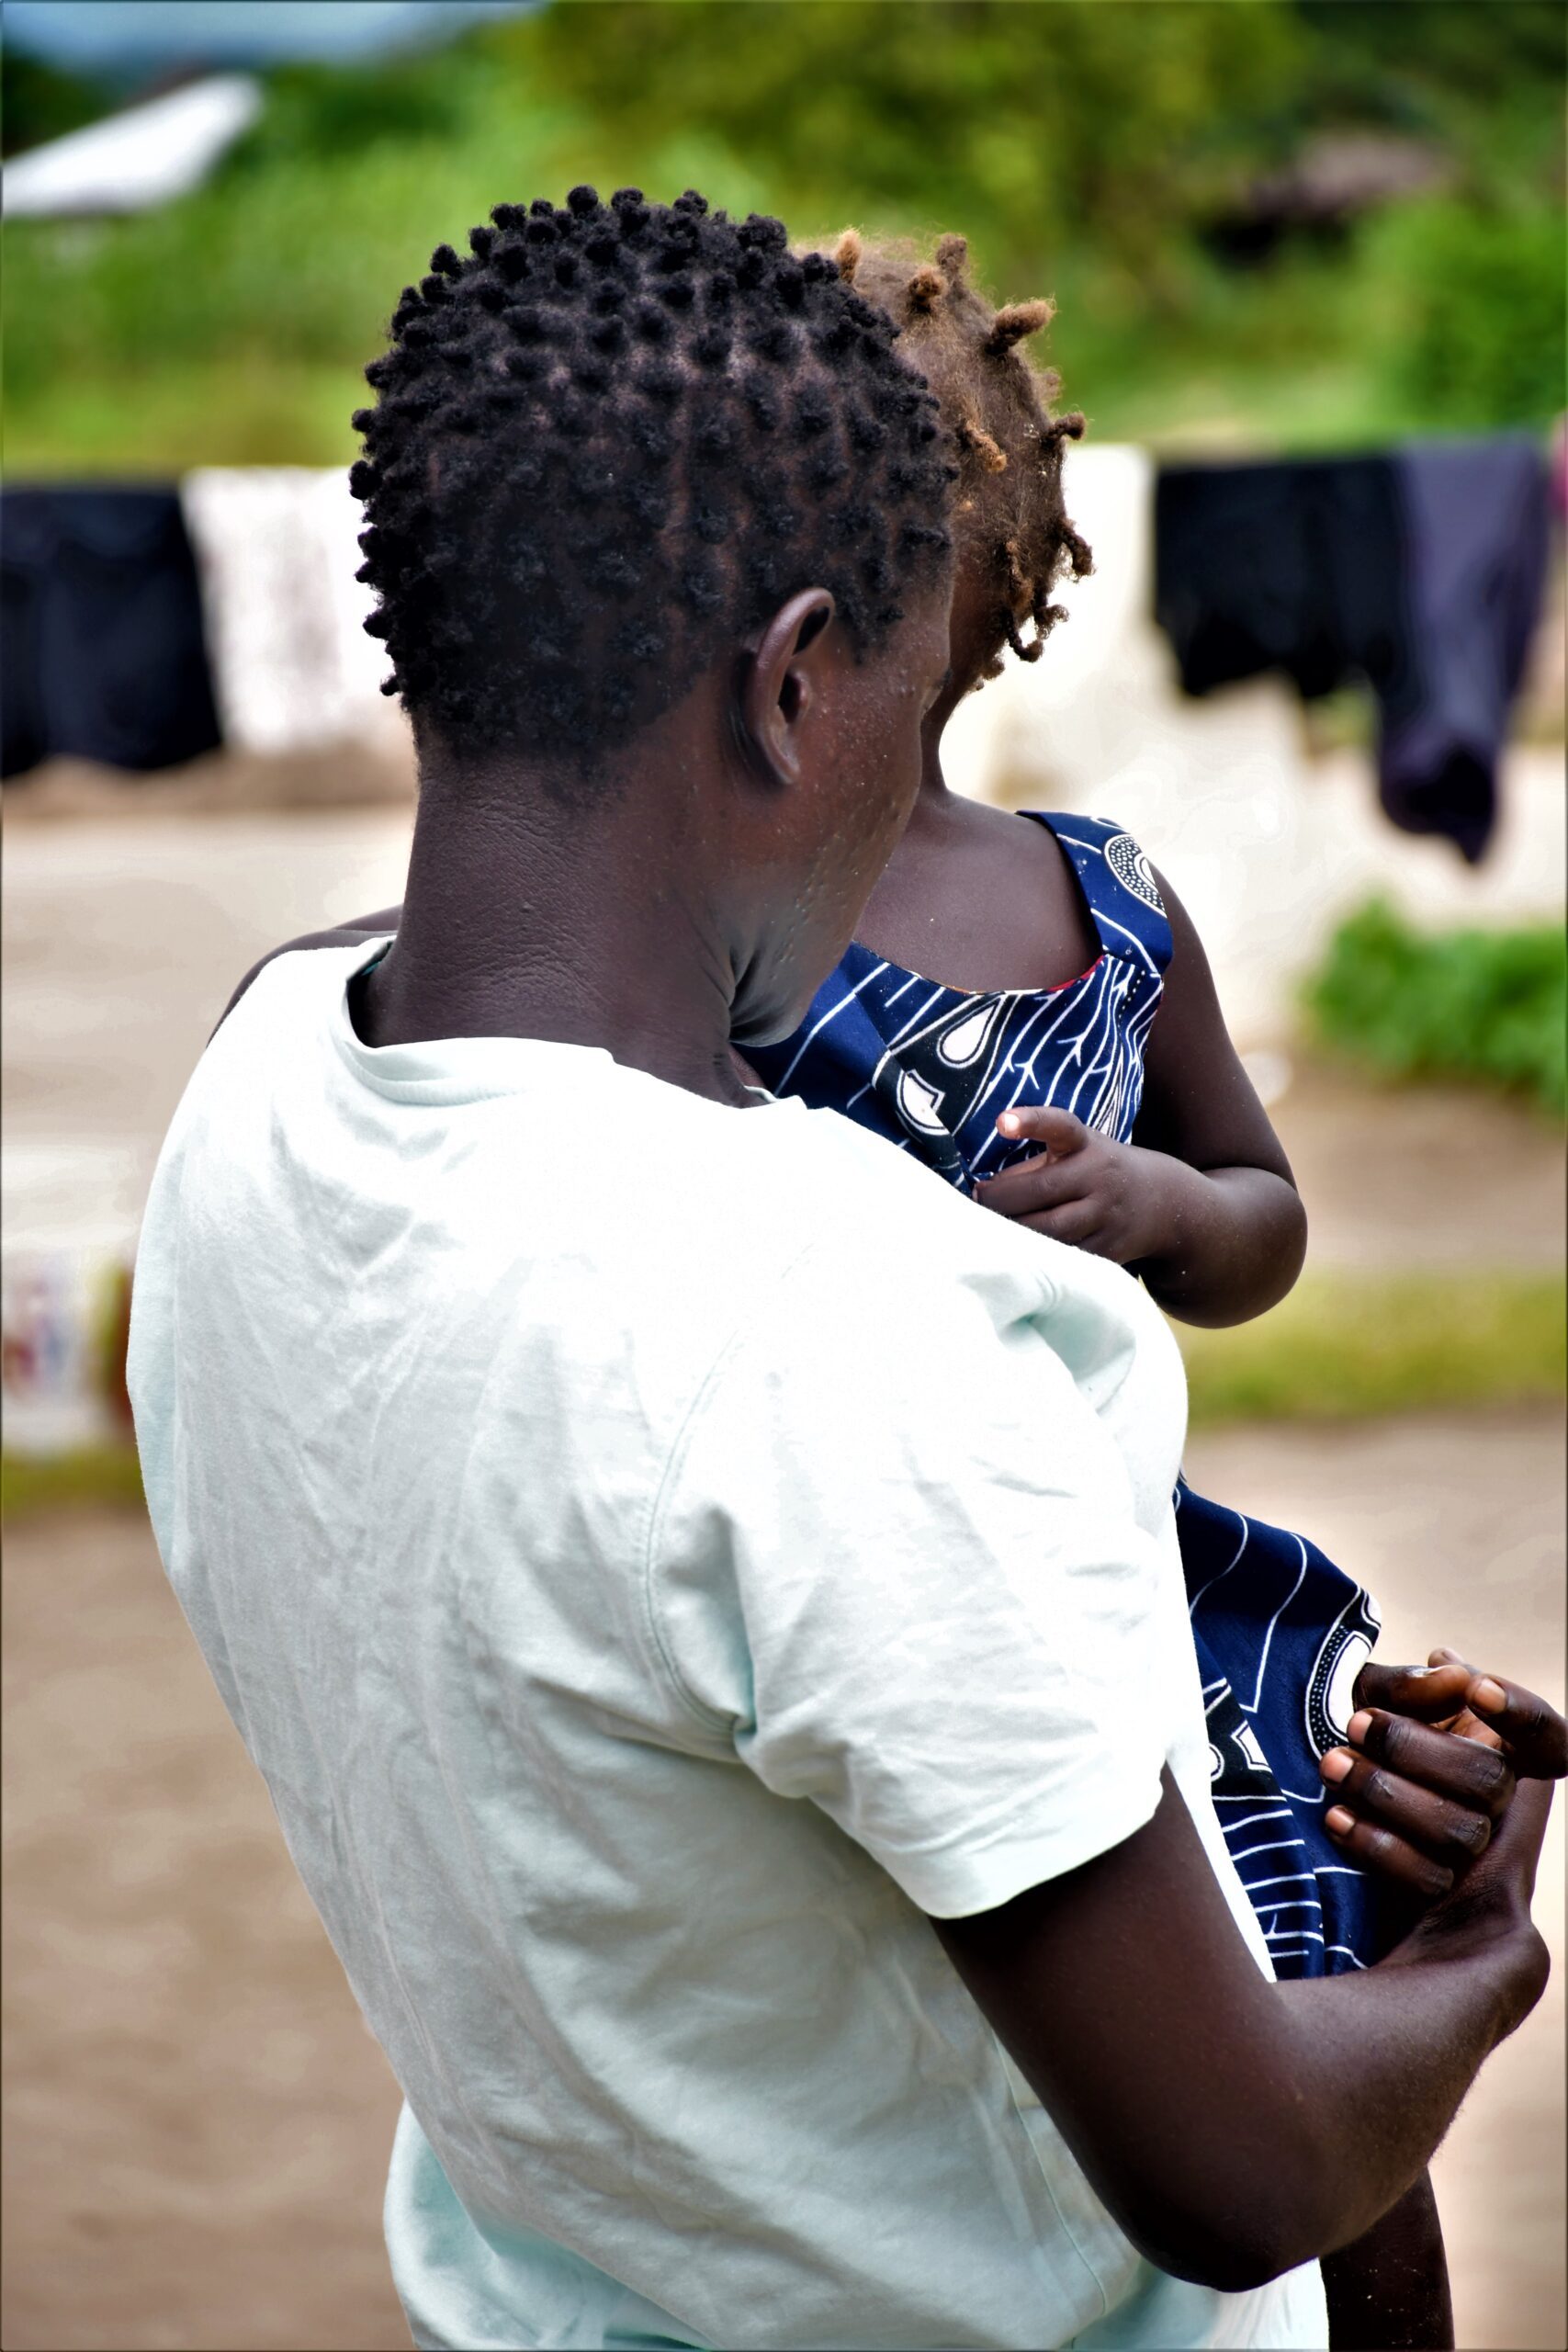 A mother holding her daughter in Uganda